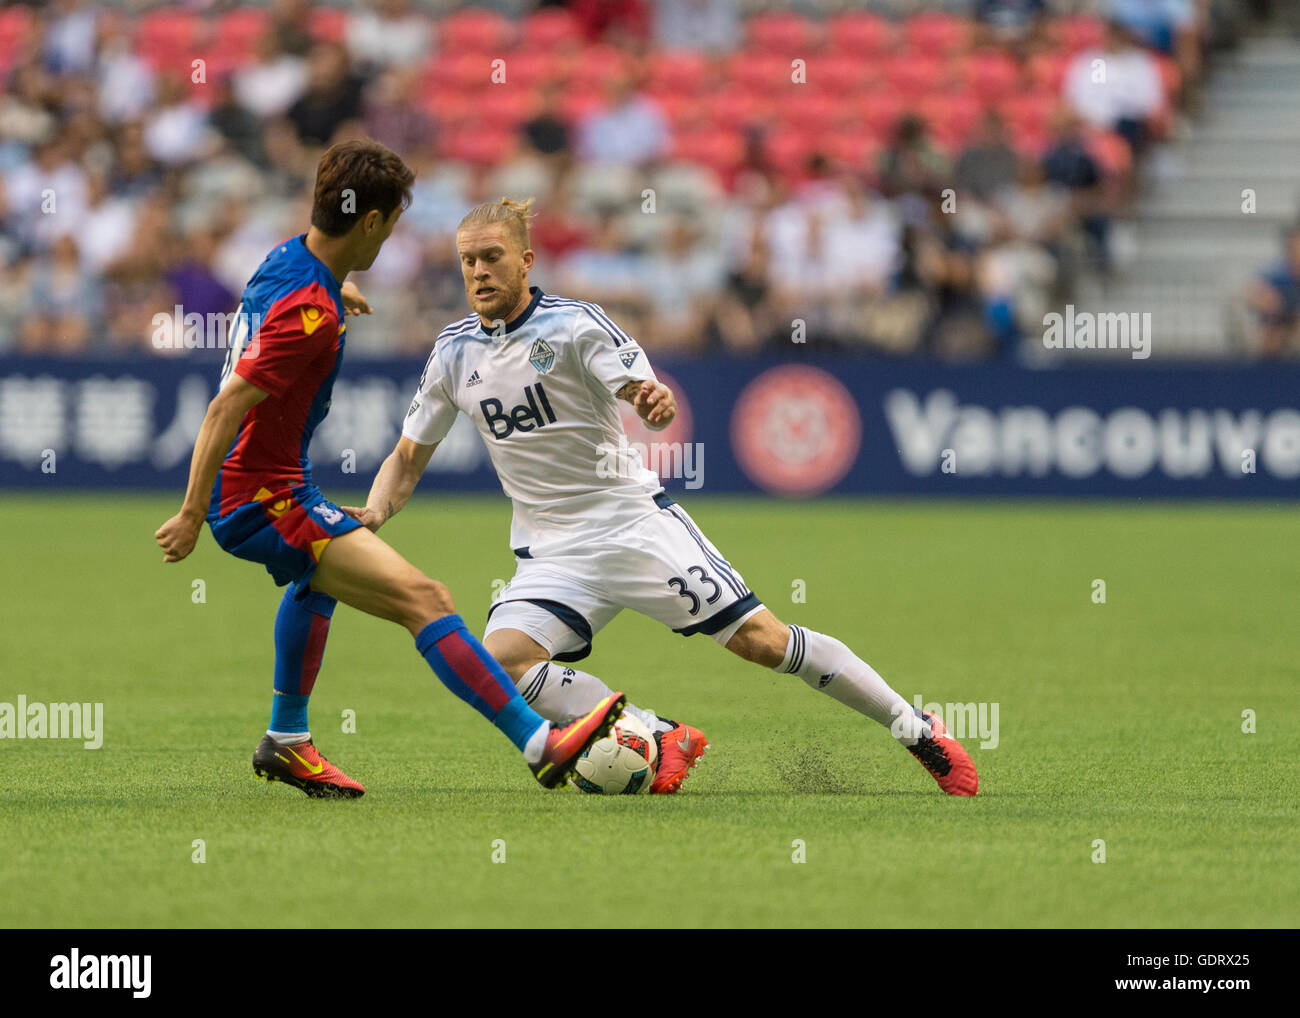 Vancouver, Canada. 19 July, 2016. Marcel de Jong (33) of Vancouver Whitecaps in action with Chung-Yong Lee (14) of Crystal Palace. Vancouver Whitecaps vs Crystal Palace, BC Place Stadium.  Final 2-2. Credit:  Gerry Rousseau/Alamy Live News Stock Photo